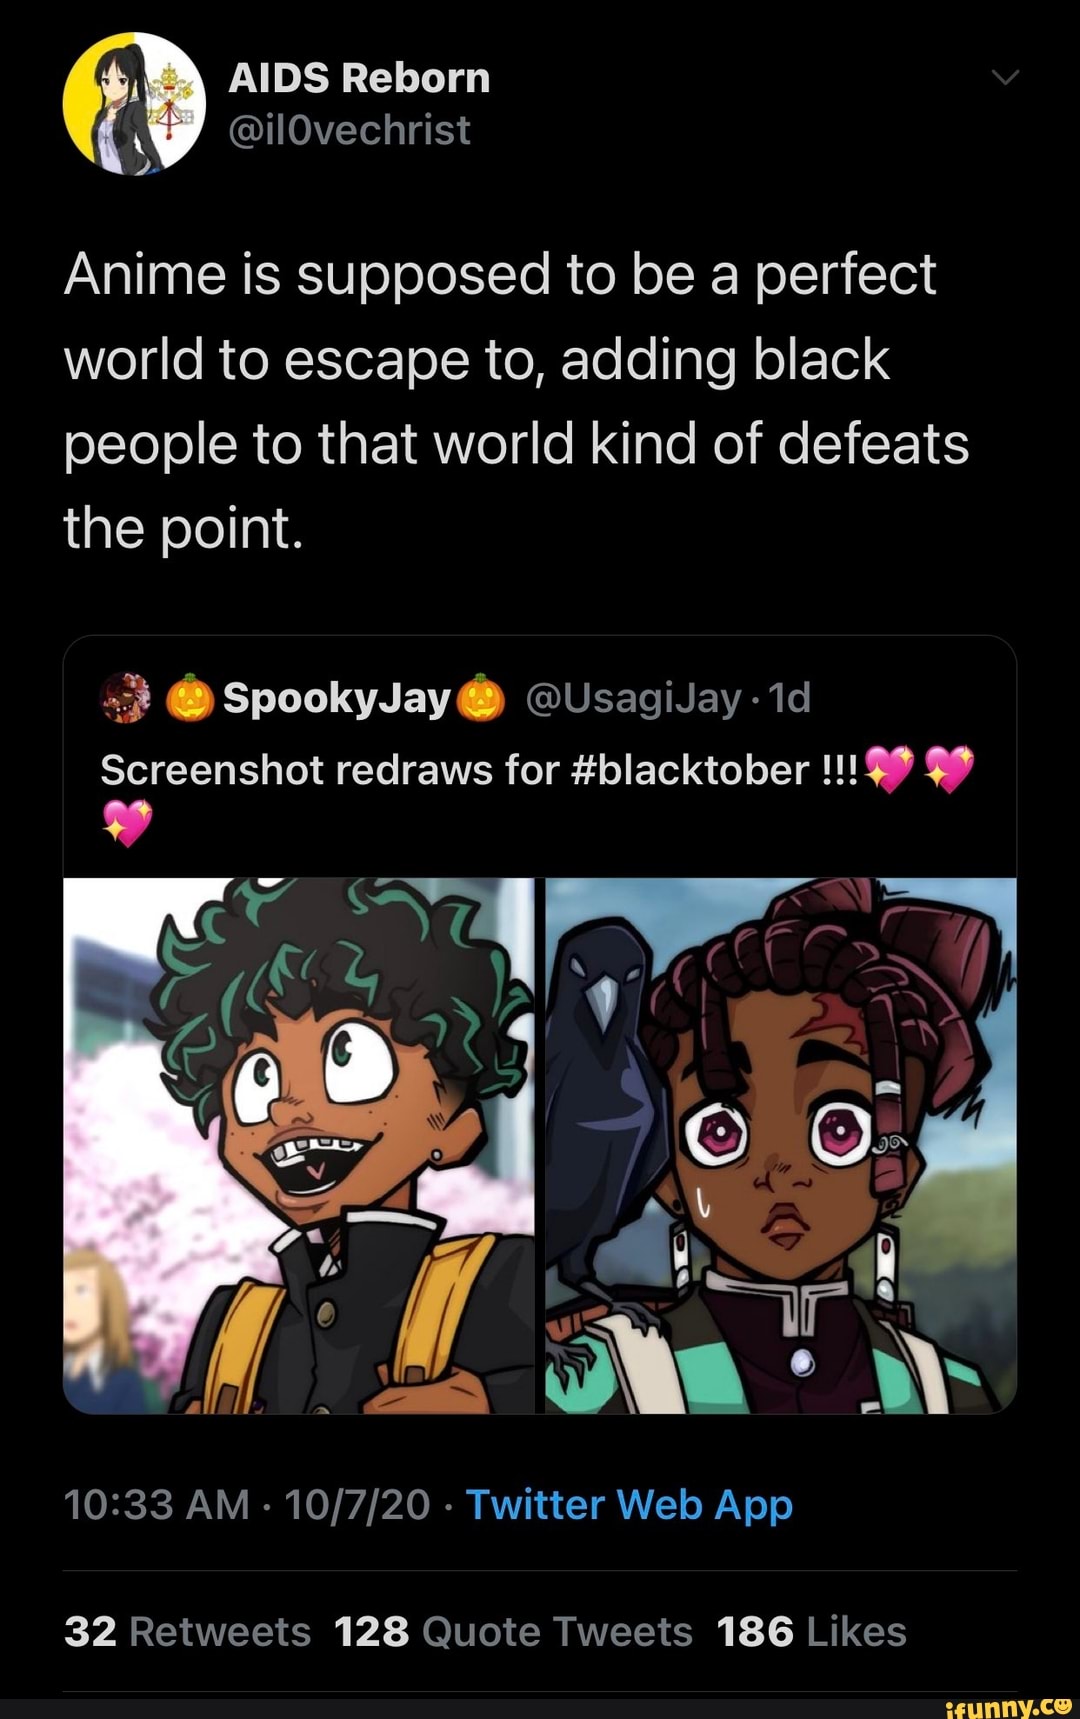 Anime is supposed to be a perfect world to escape to, adding black people  to that world kind of defeats the point. SpookyJay@) @UsagiJay id  Screenshot redraws for #blacktober - iFunny Brazil